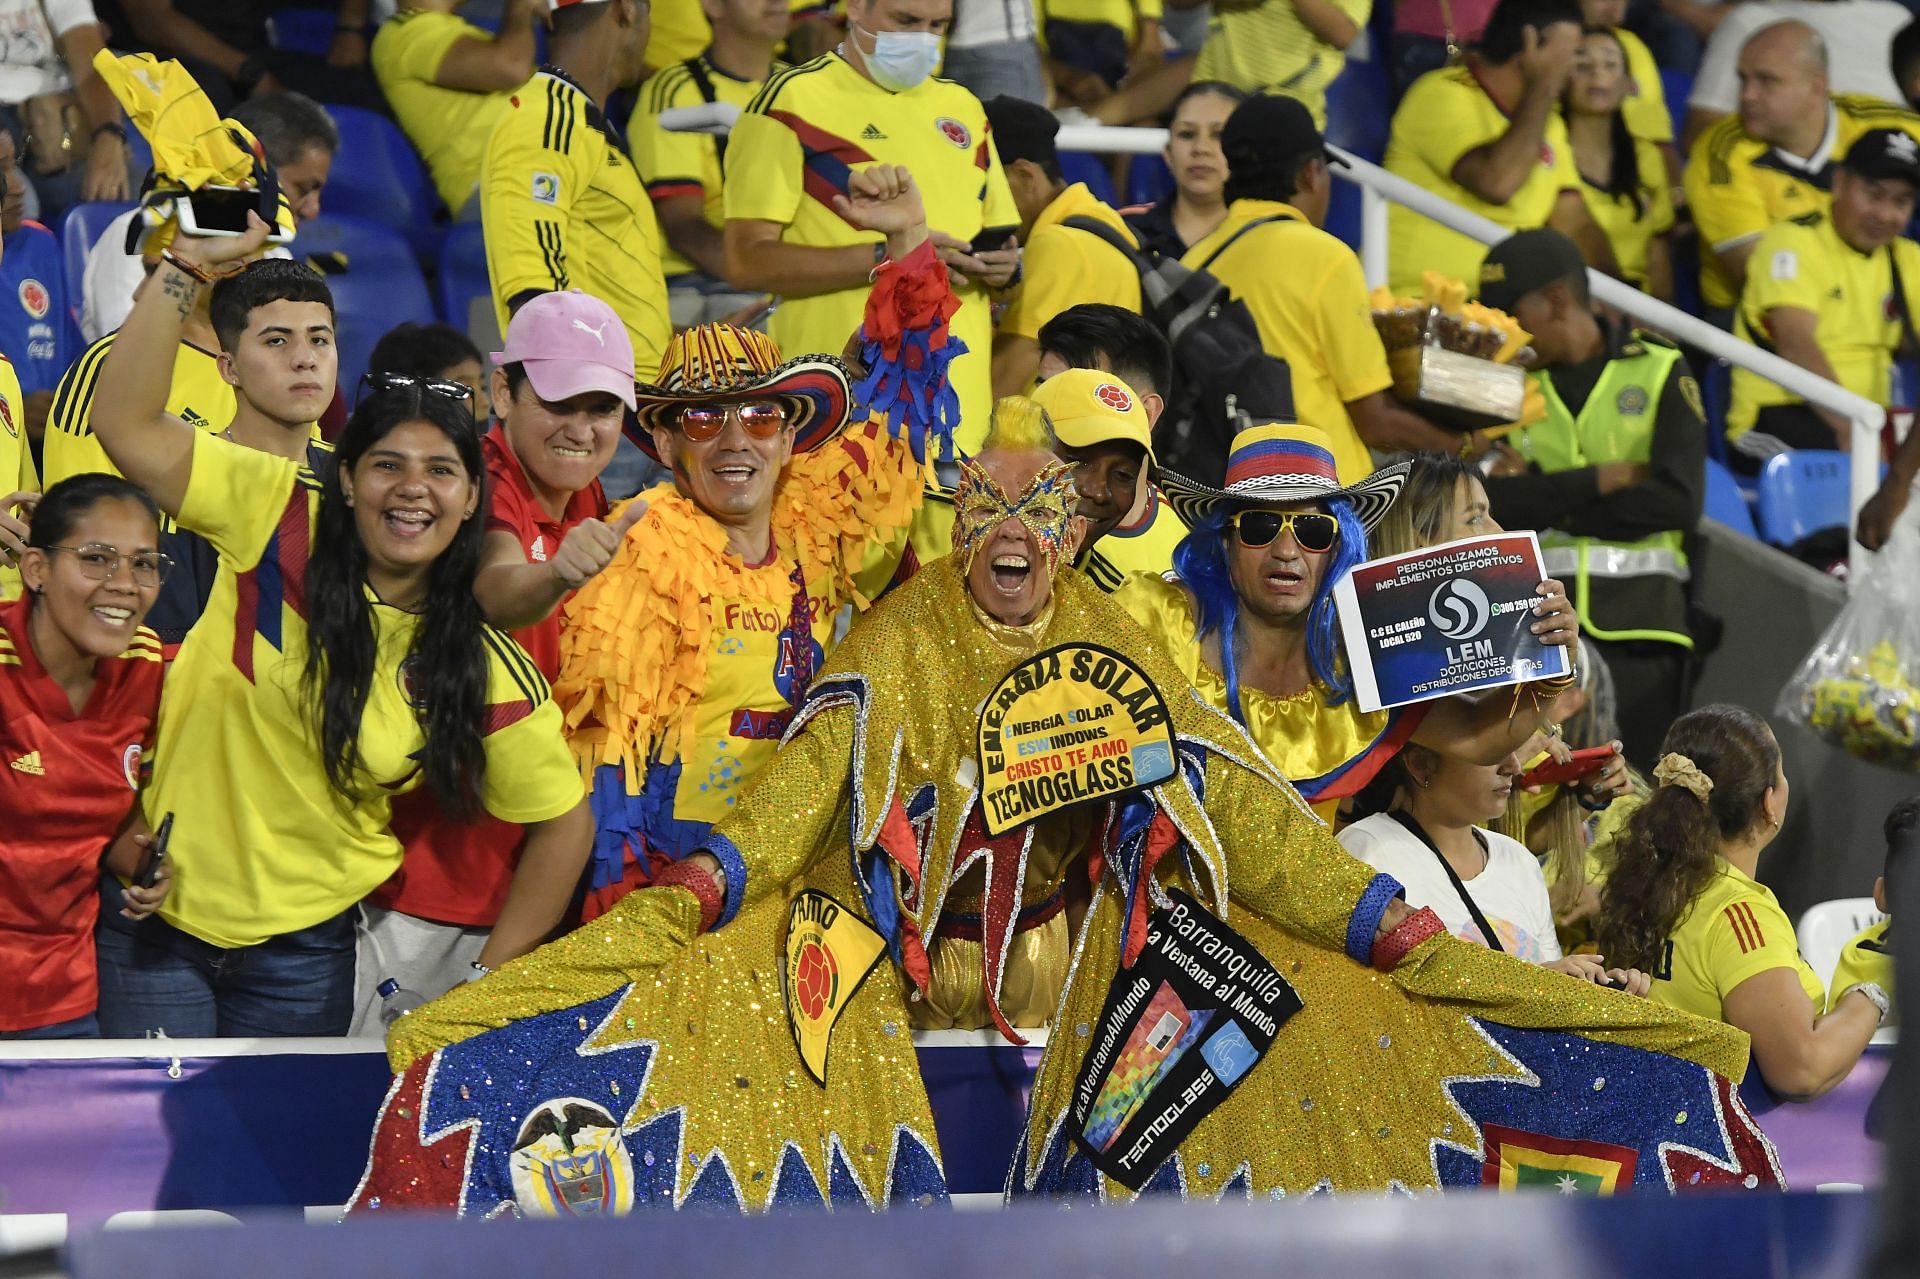 Colombia will need their fans behind them in the final.